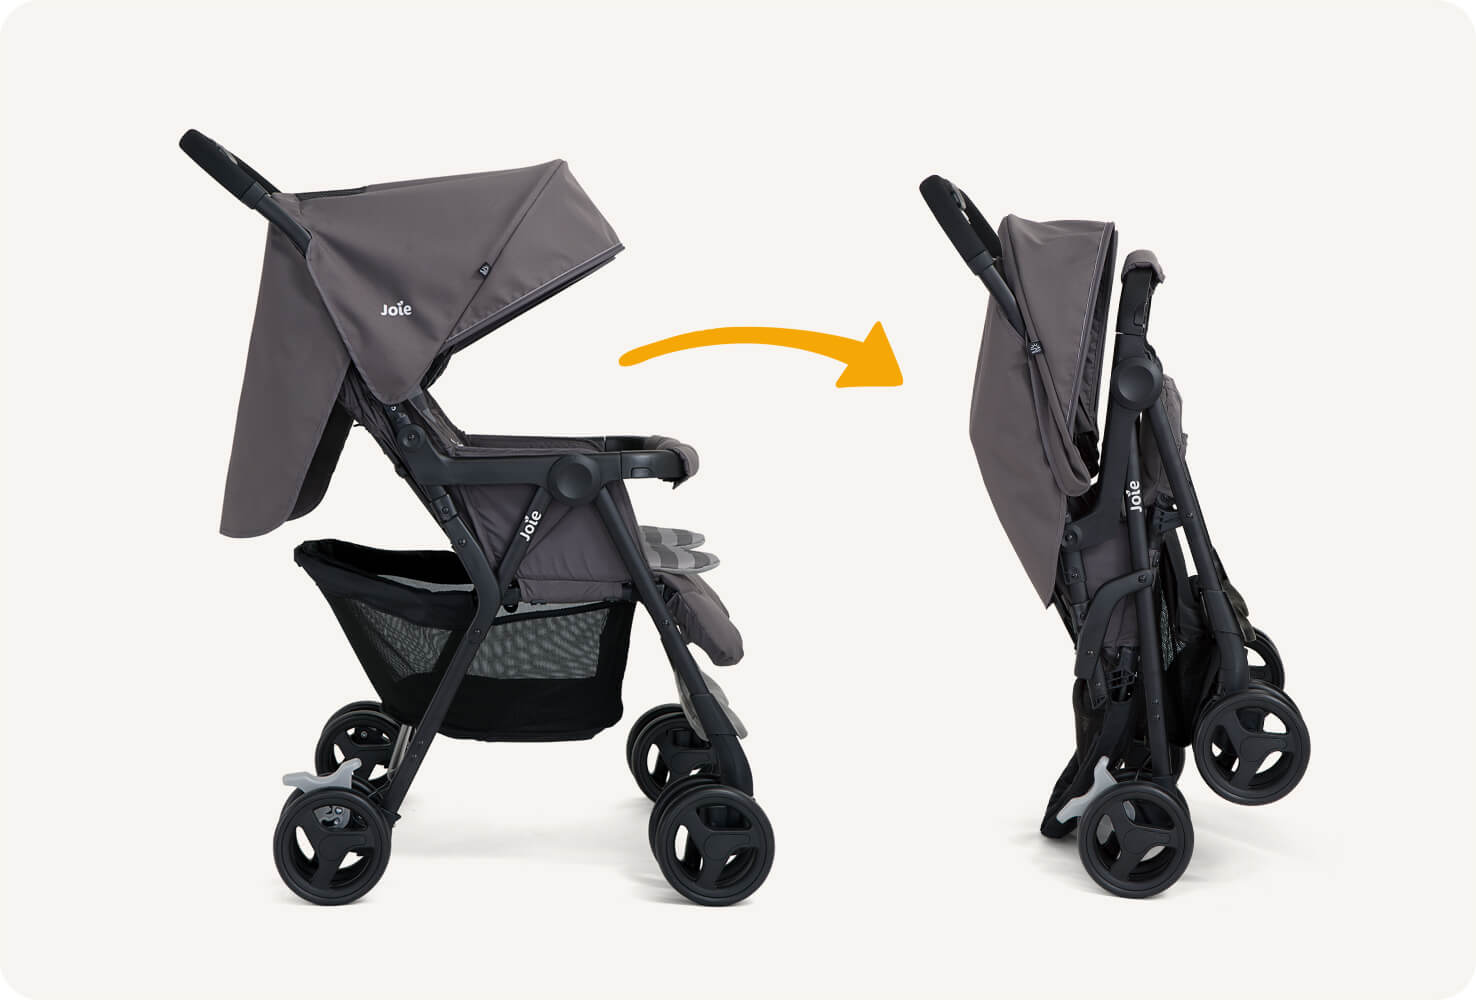 Dark gray Joie Aire Twin double strollers side by side in profile facing to the right: the stroller on the left is open and the stroller on the right is folded, with an orange arrow pointing from the left to the right.